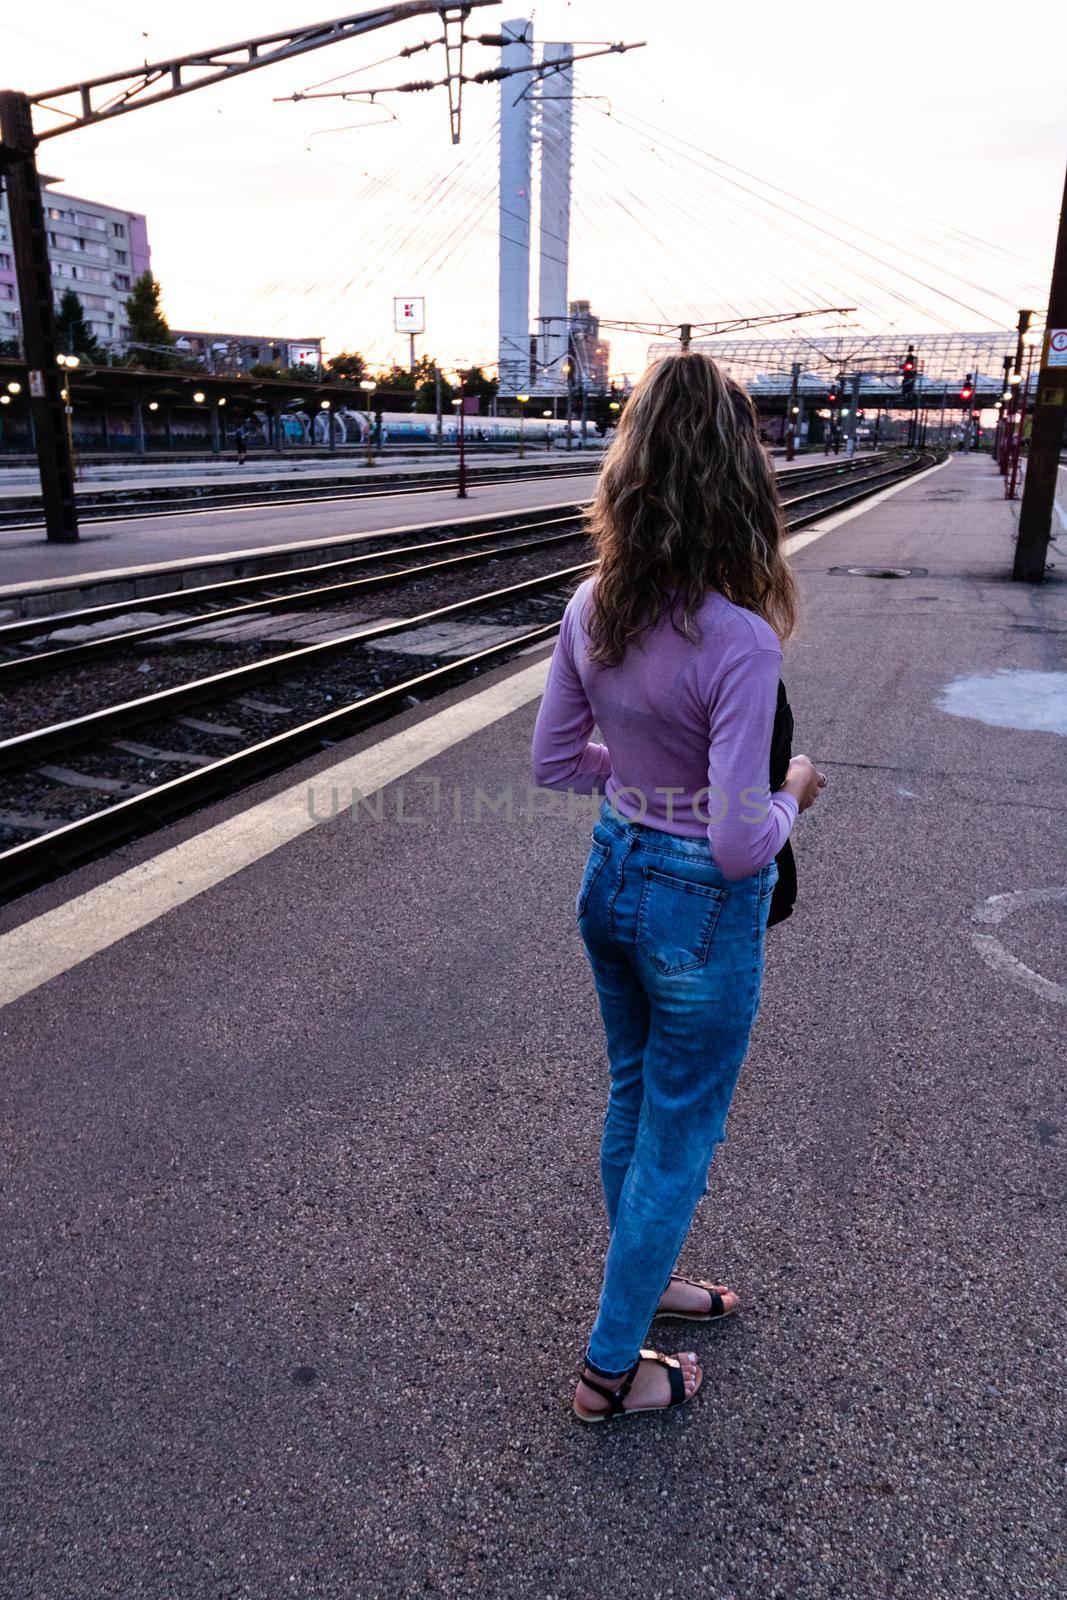 Young girl walking alone on train platform and taking photos on railway station by vladispas